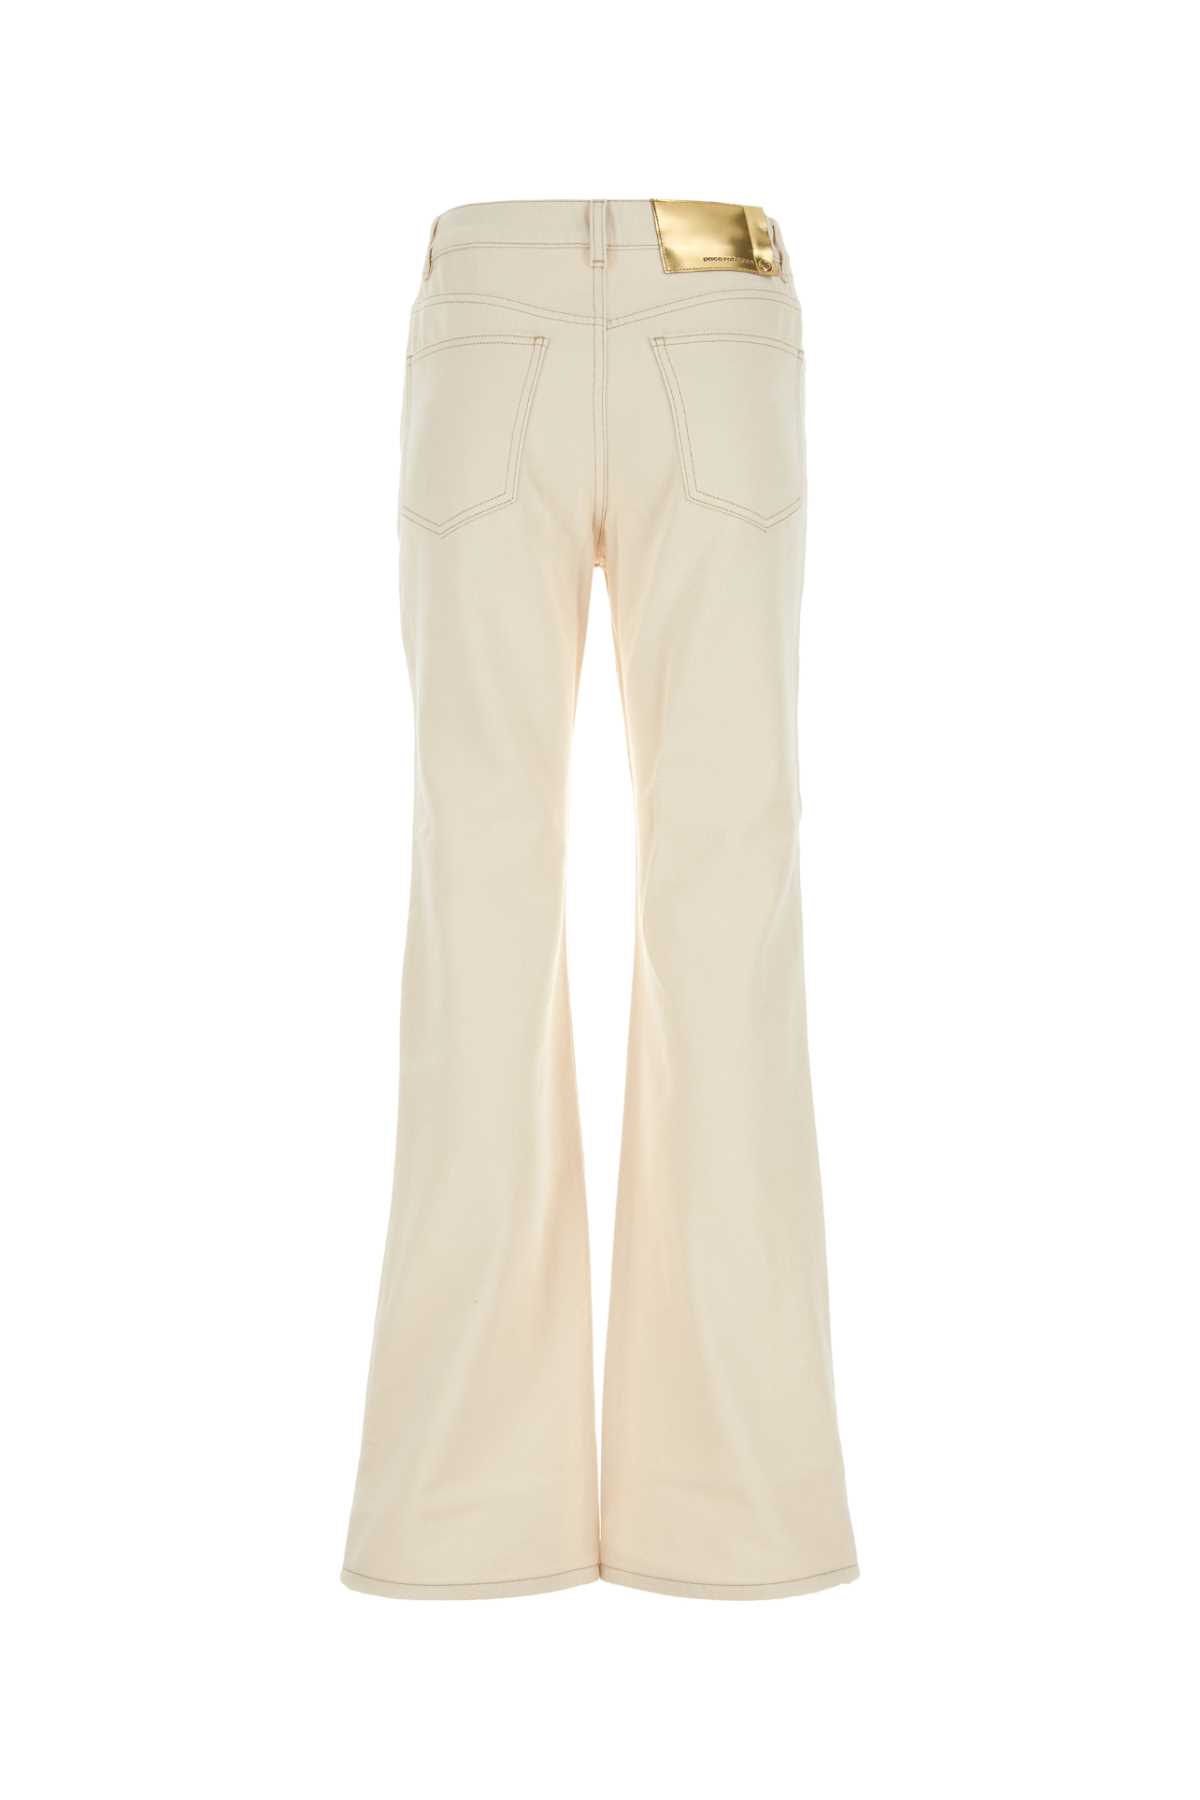 Paco Rabanne Ivory Denim Jeans In Nude